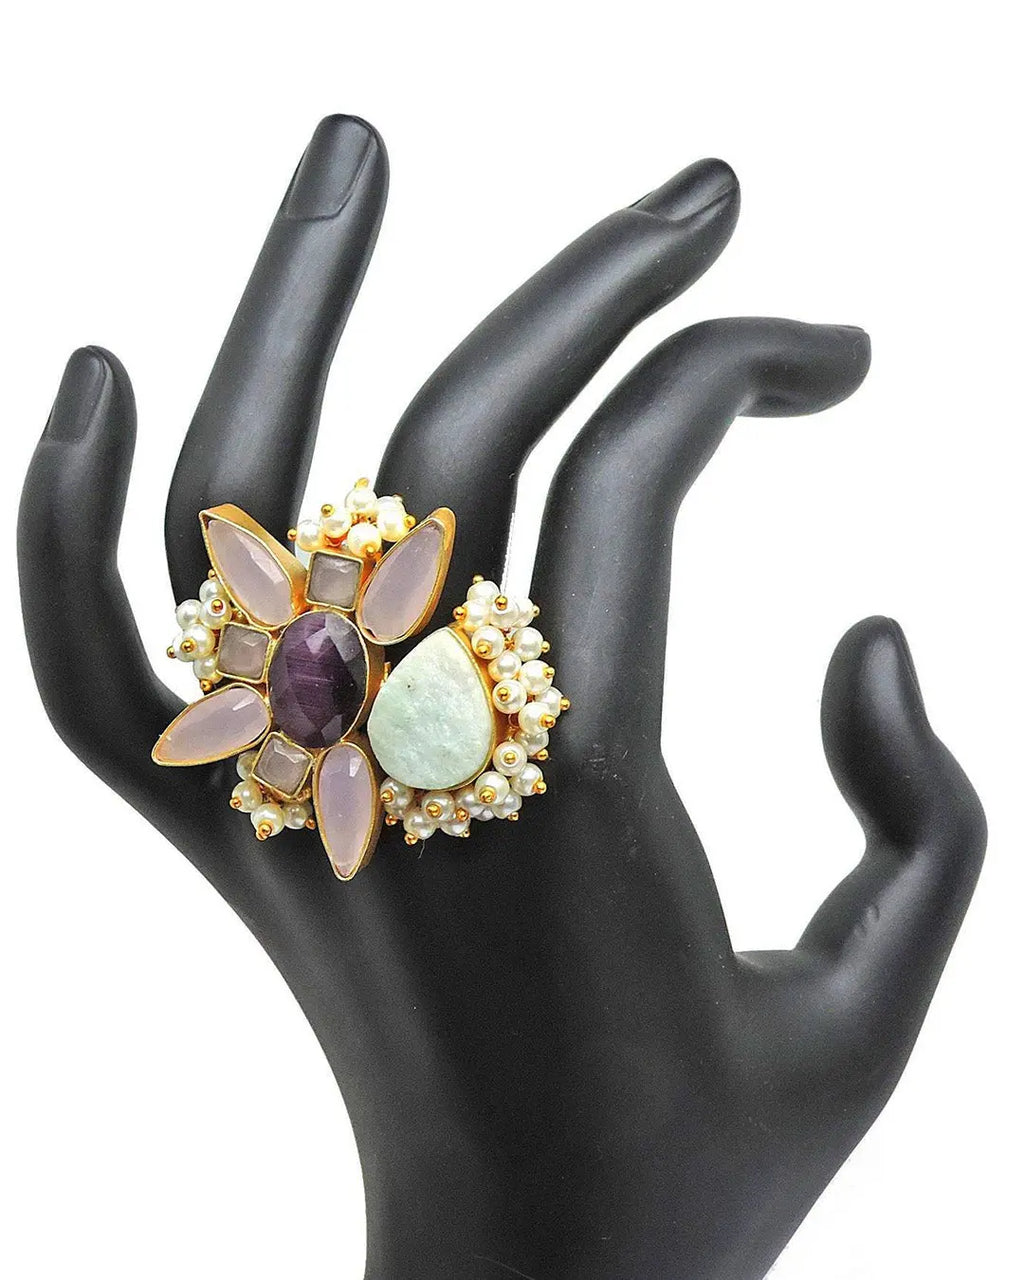 Nadine Ring- Handcrafted Jewellery from Dori